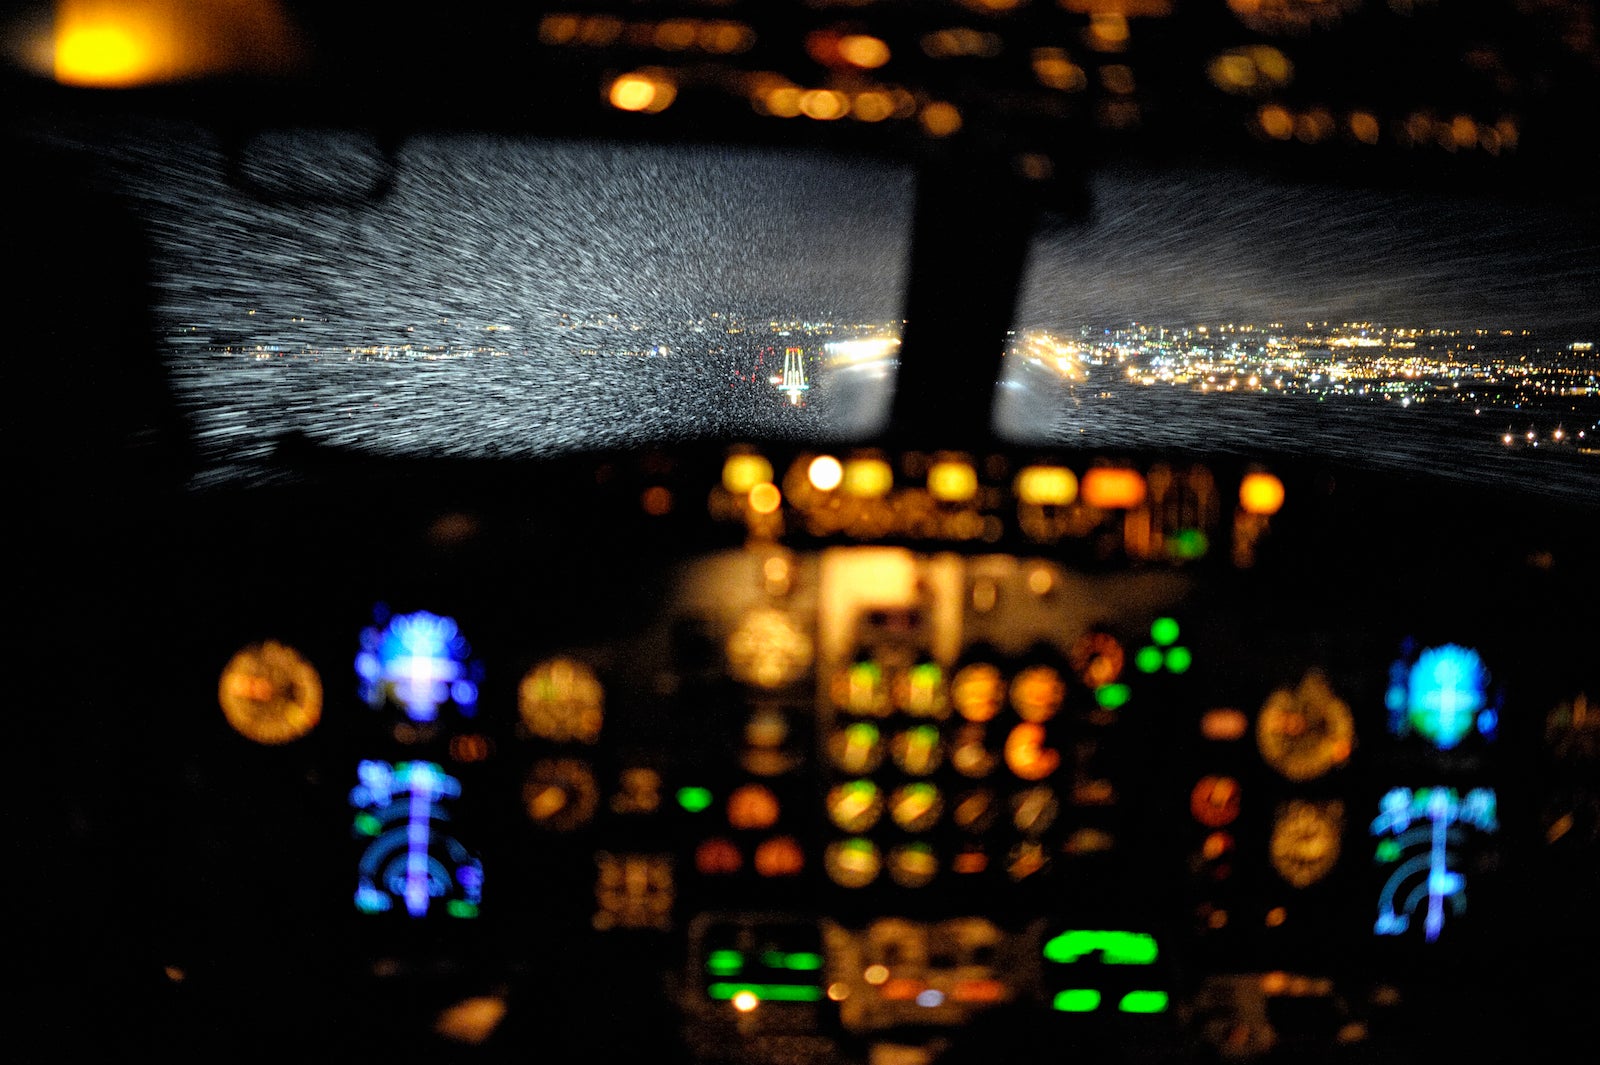 Cockpit View of Aircraft Approching Airport During Snowfall at Night